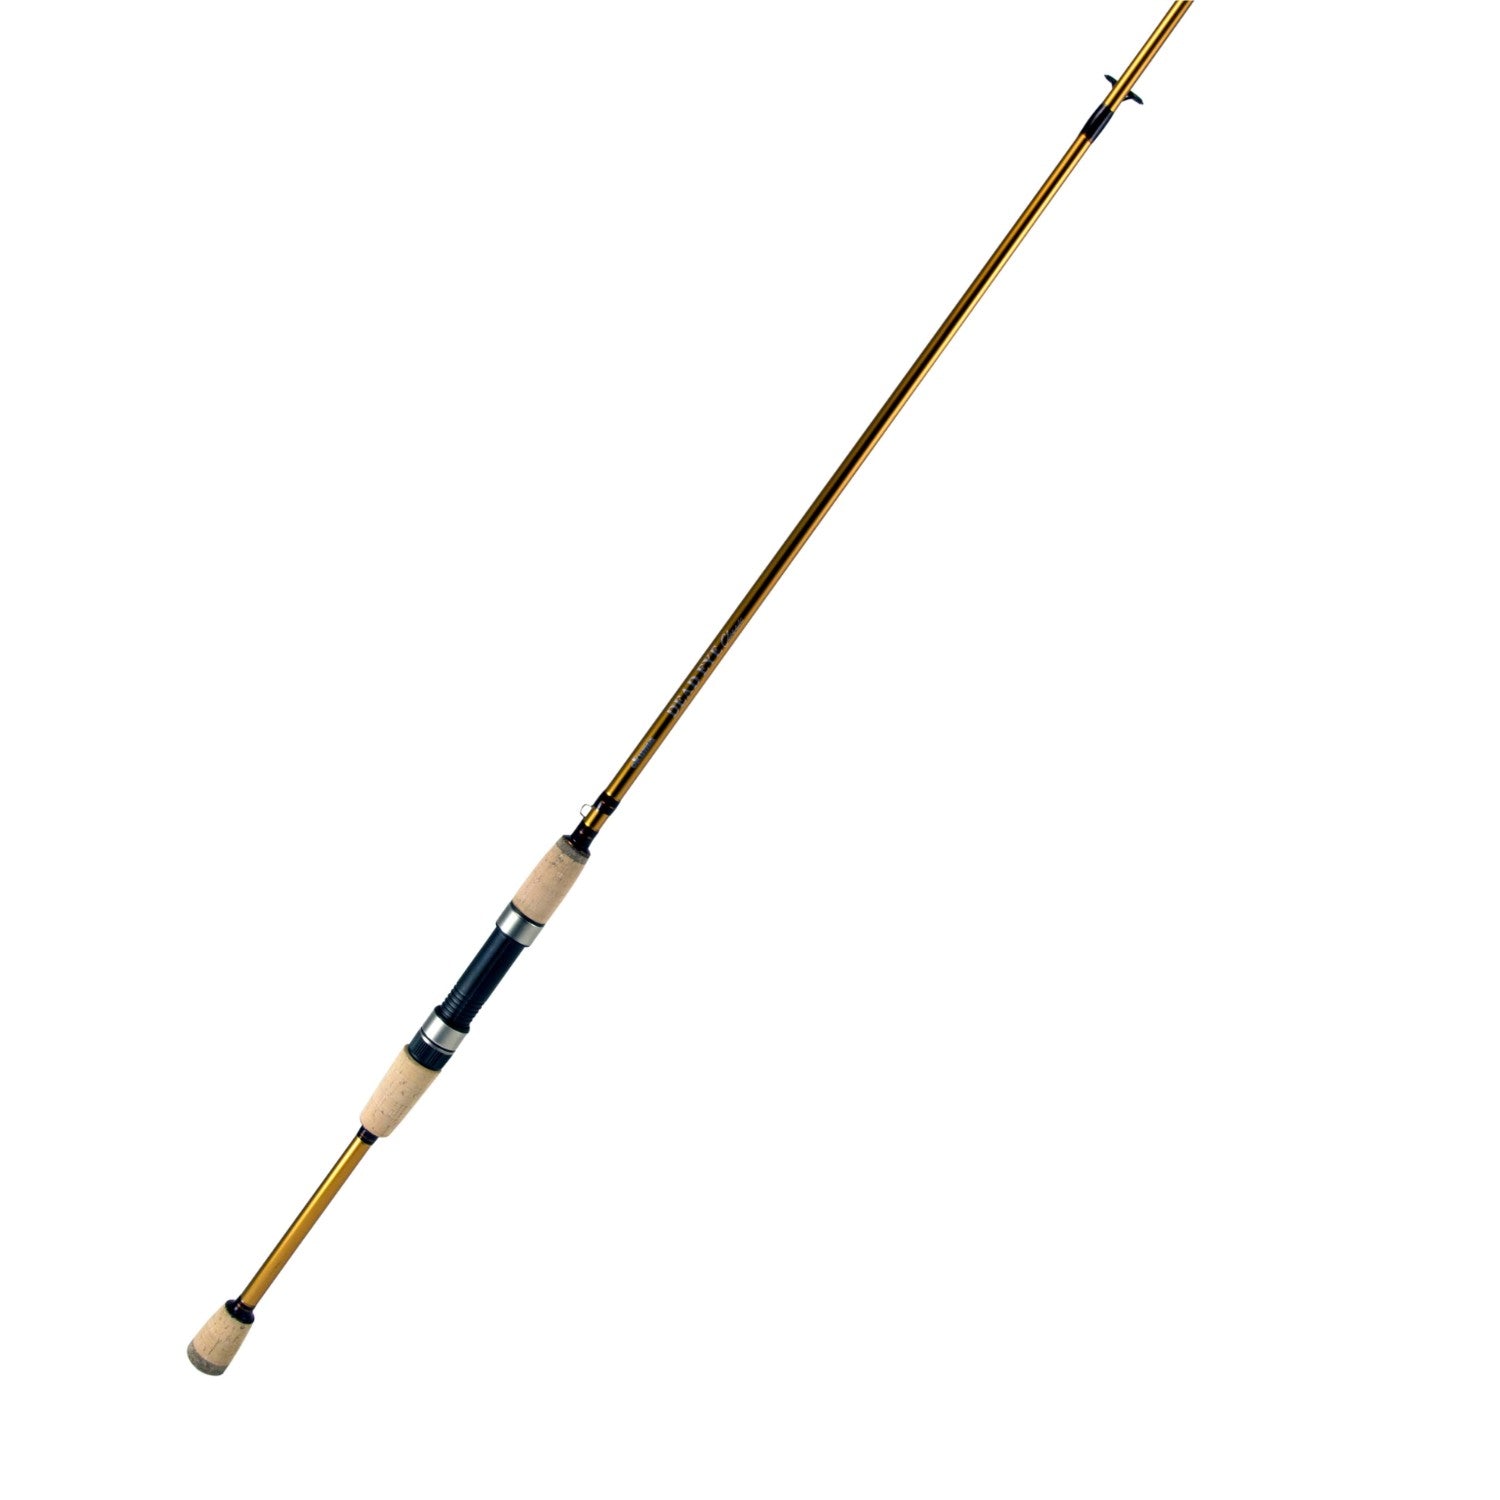 BnM Silver Cat Elite Rod 7.5 ft 1 pc – Fishing in the USA